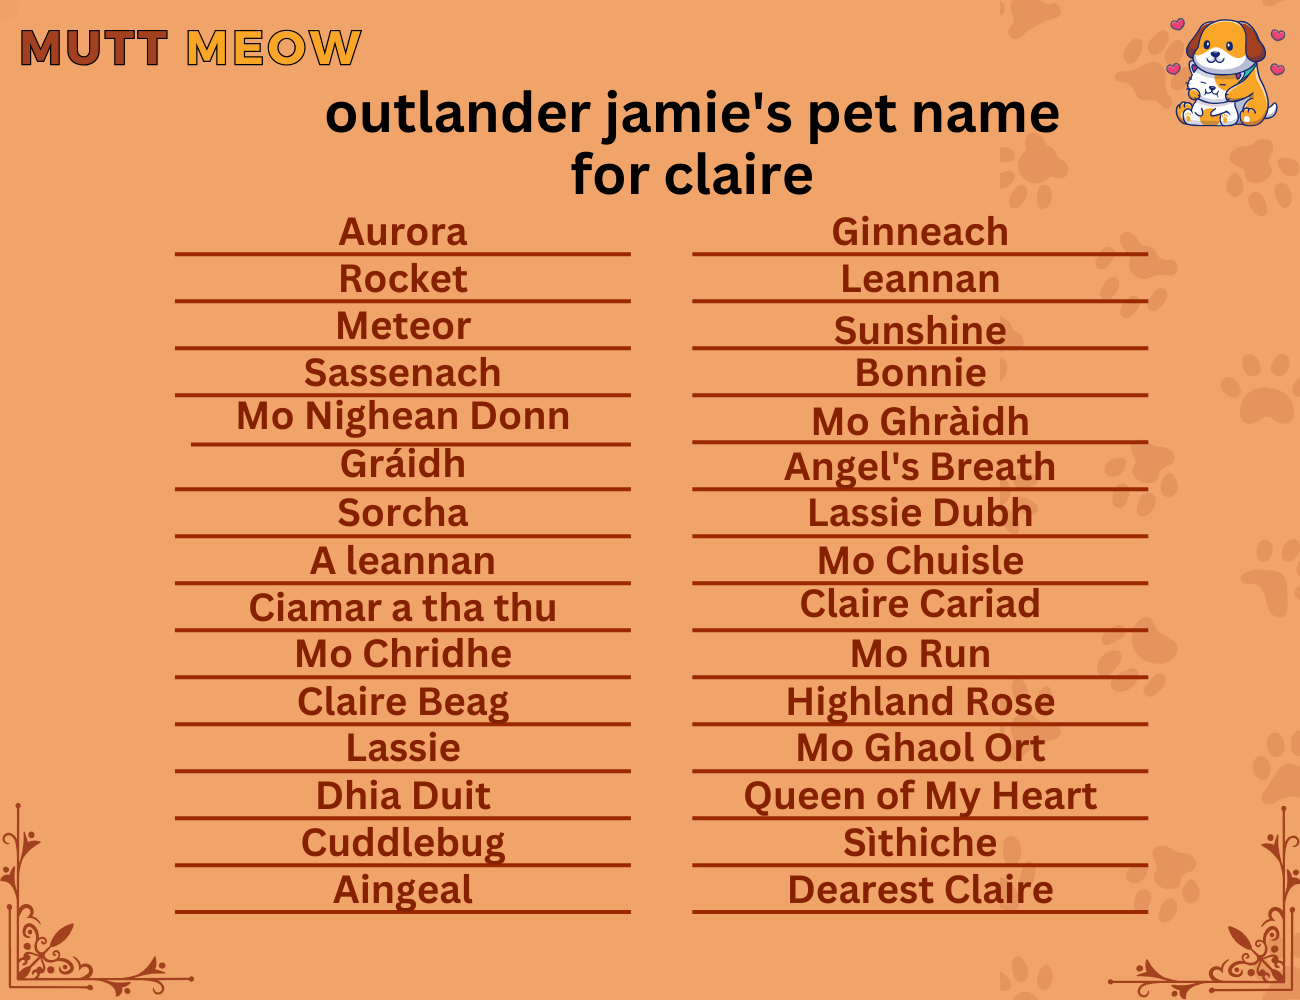 outlander jamie's pet name for claire